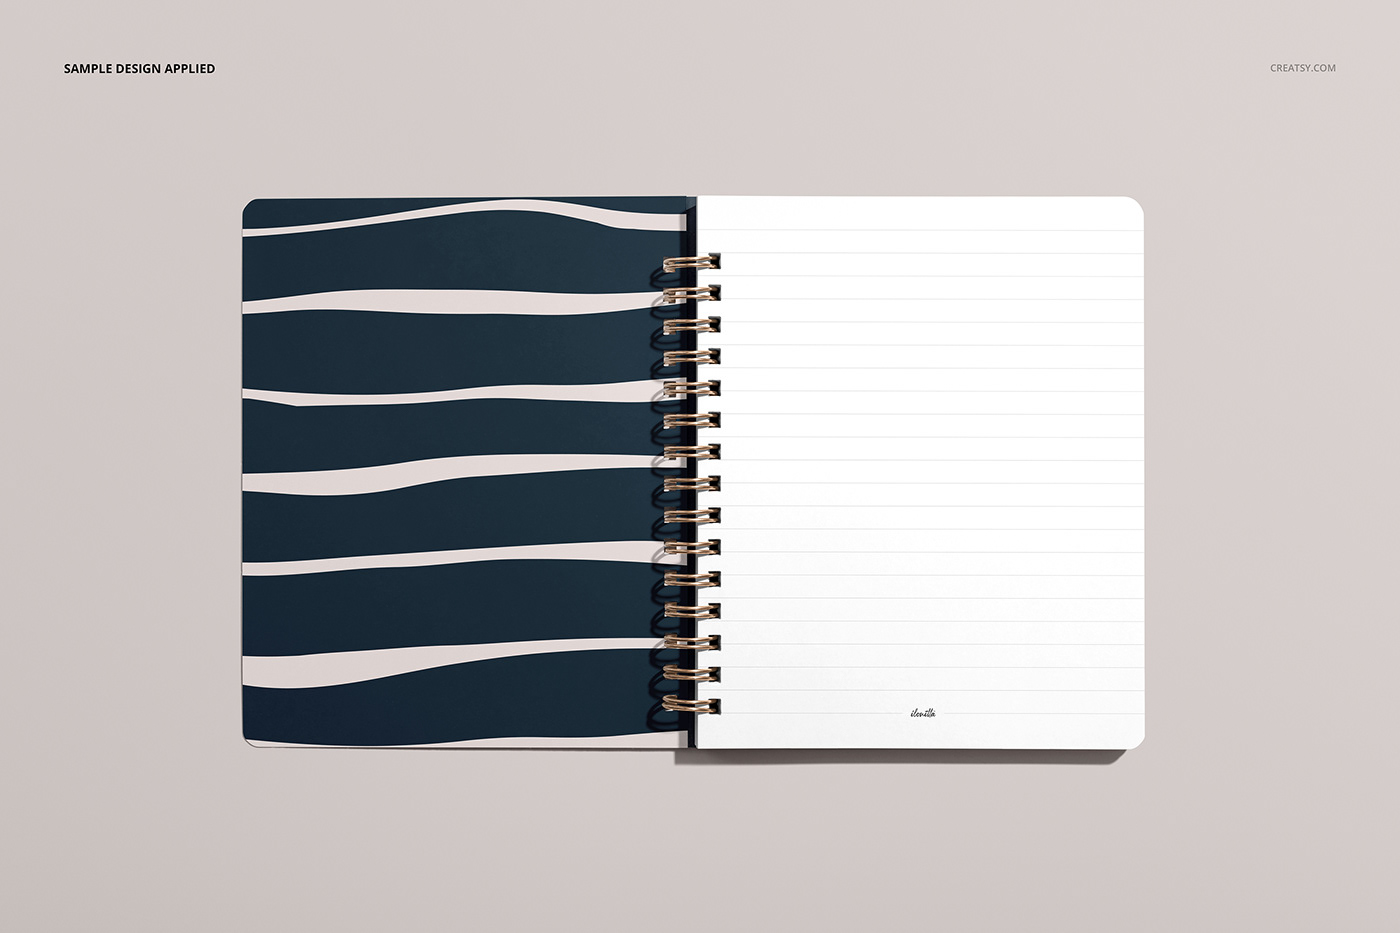 binded coil creatsy mock-up Mockup note notebook notepad Spiral template